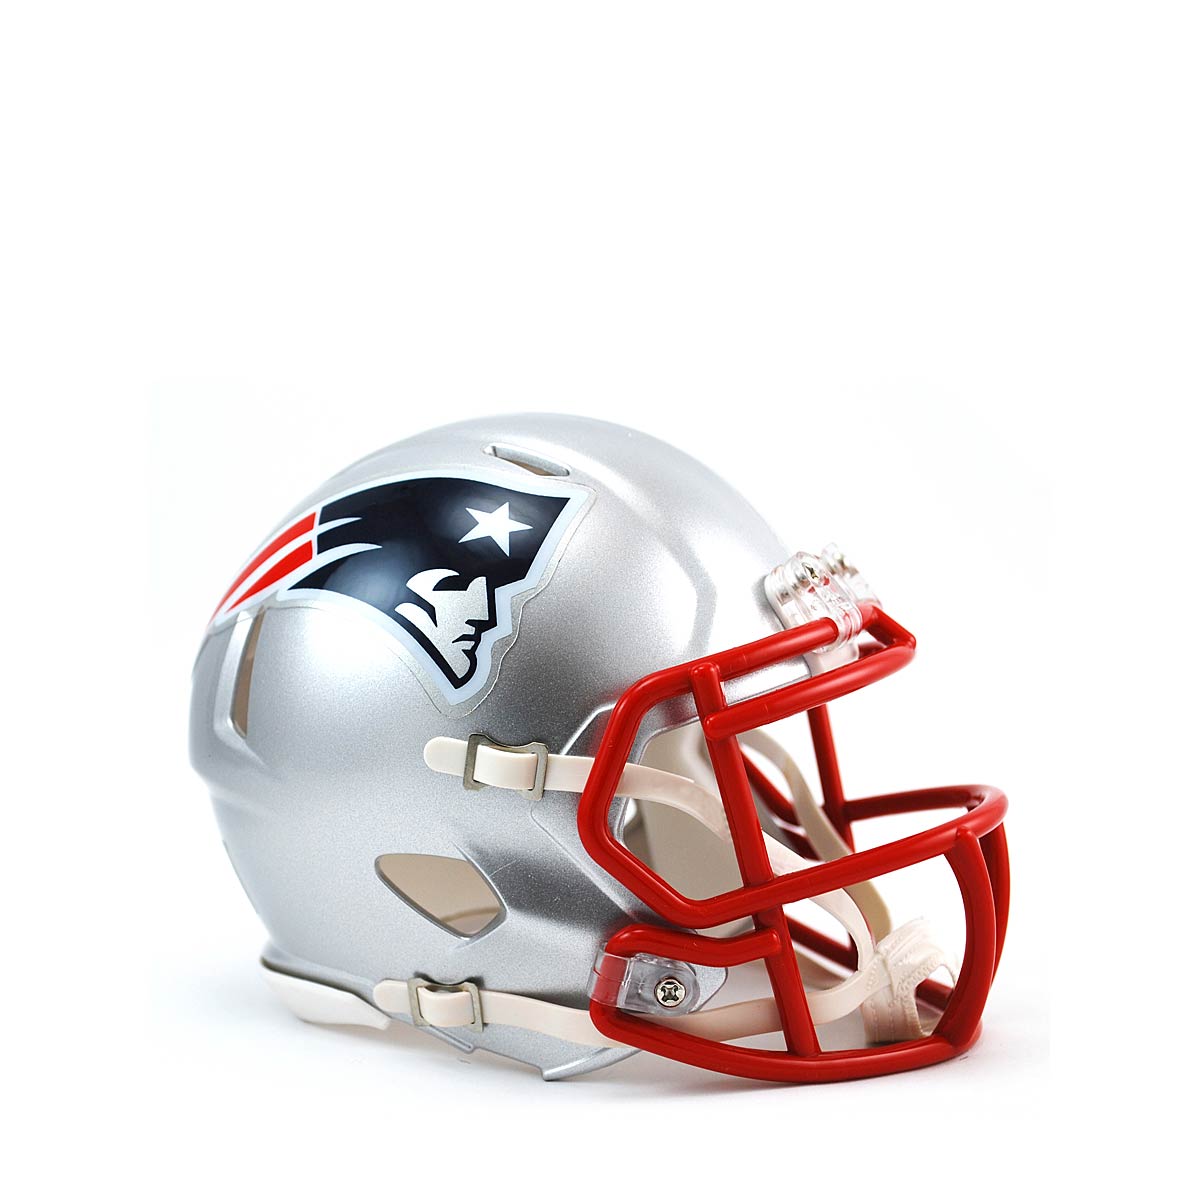 Riddell Nfl Mini Helm Speed New England Patriots, Blue/Red/White